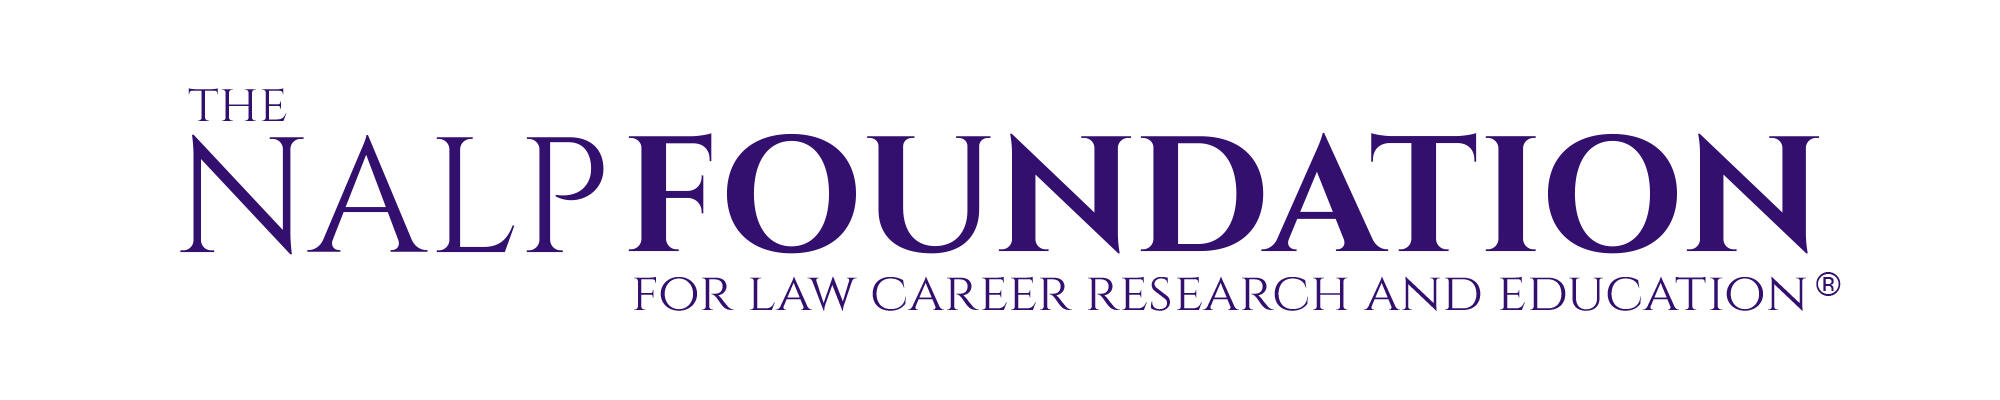 The NALP Foundation for Law Career Research and Education